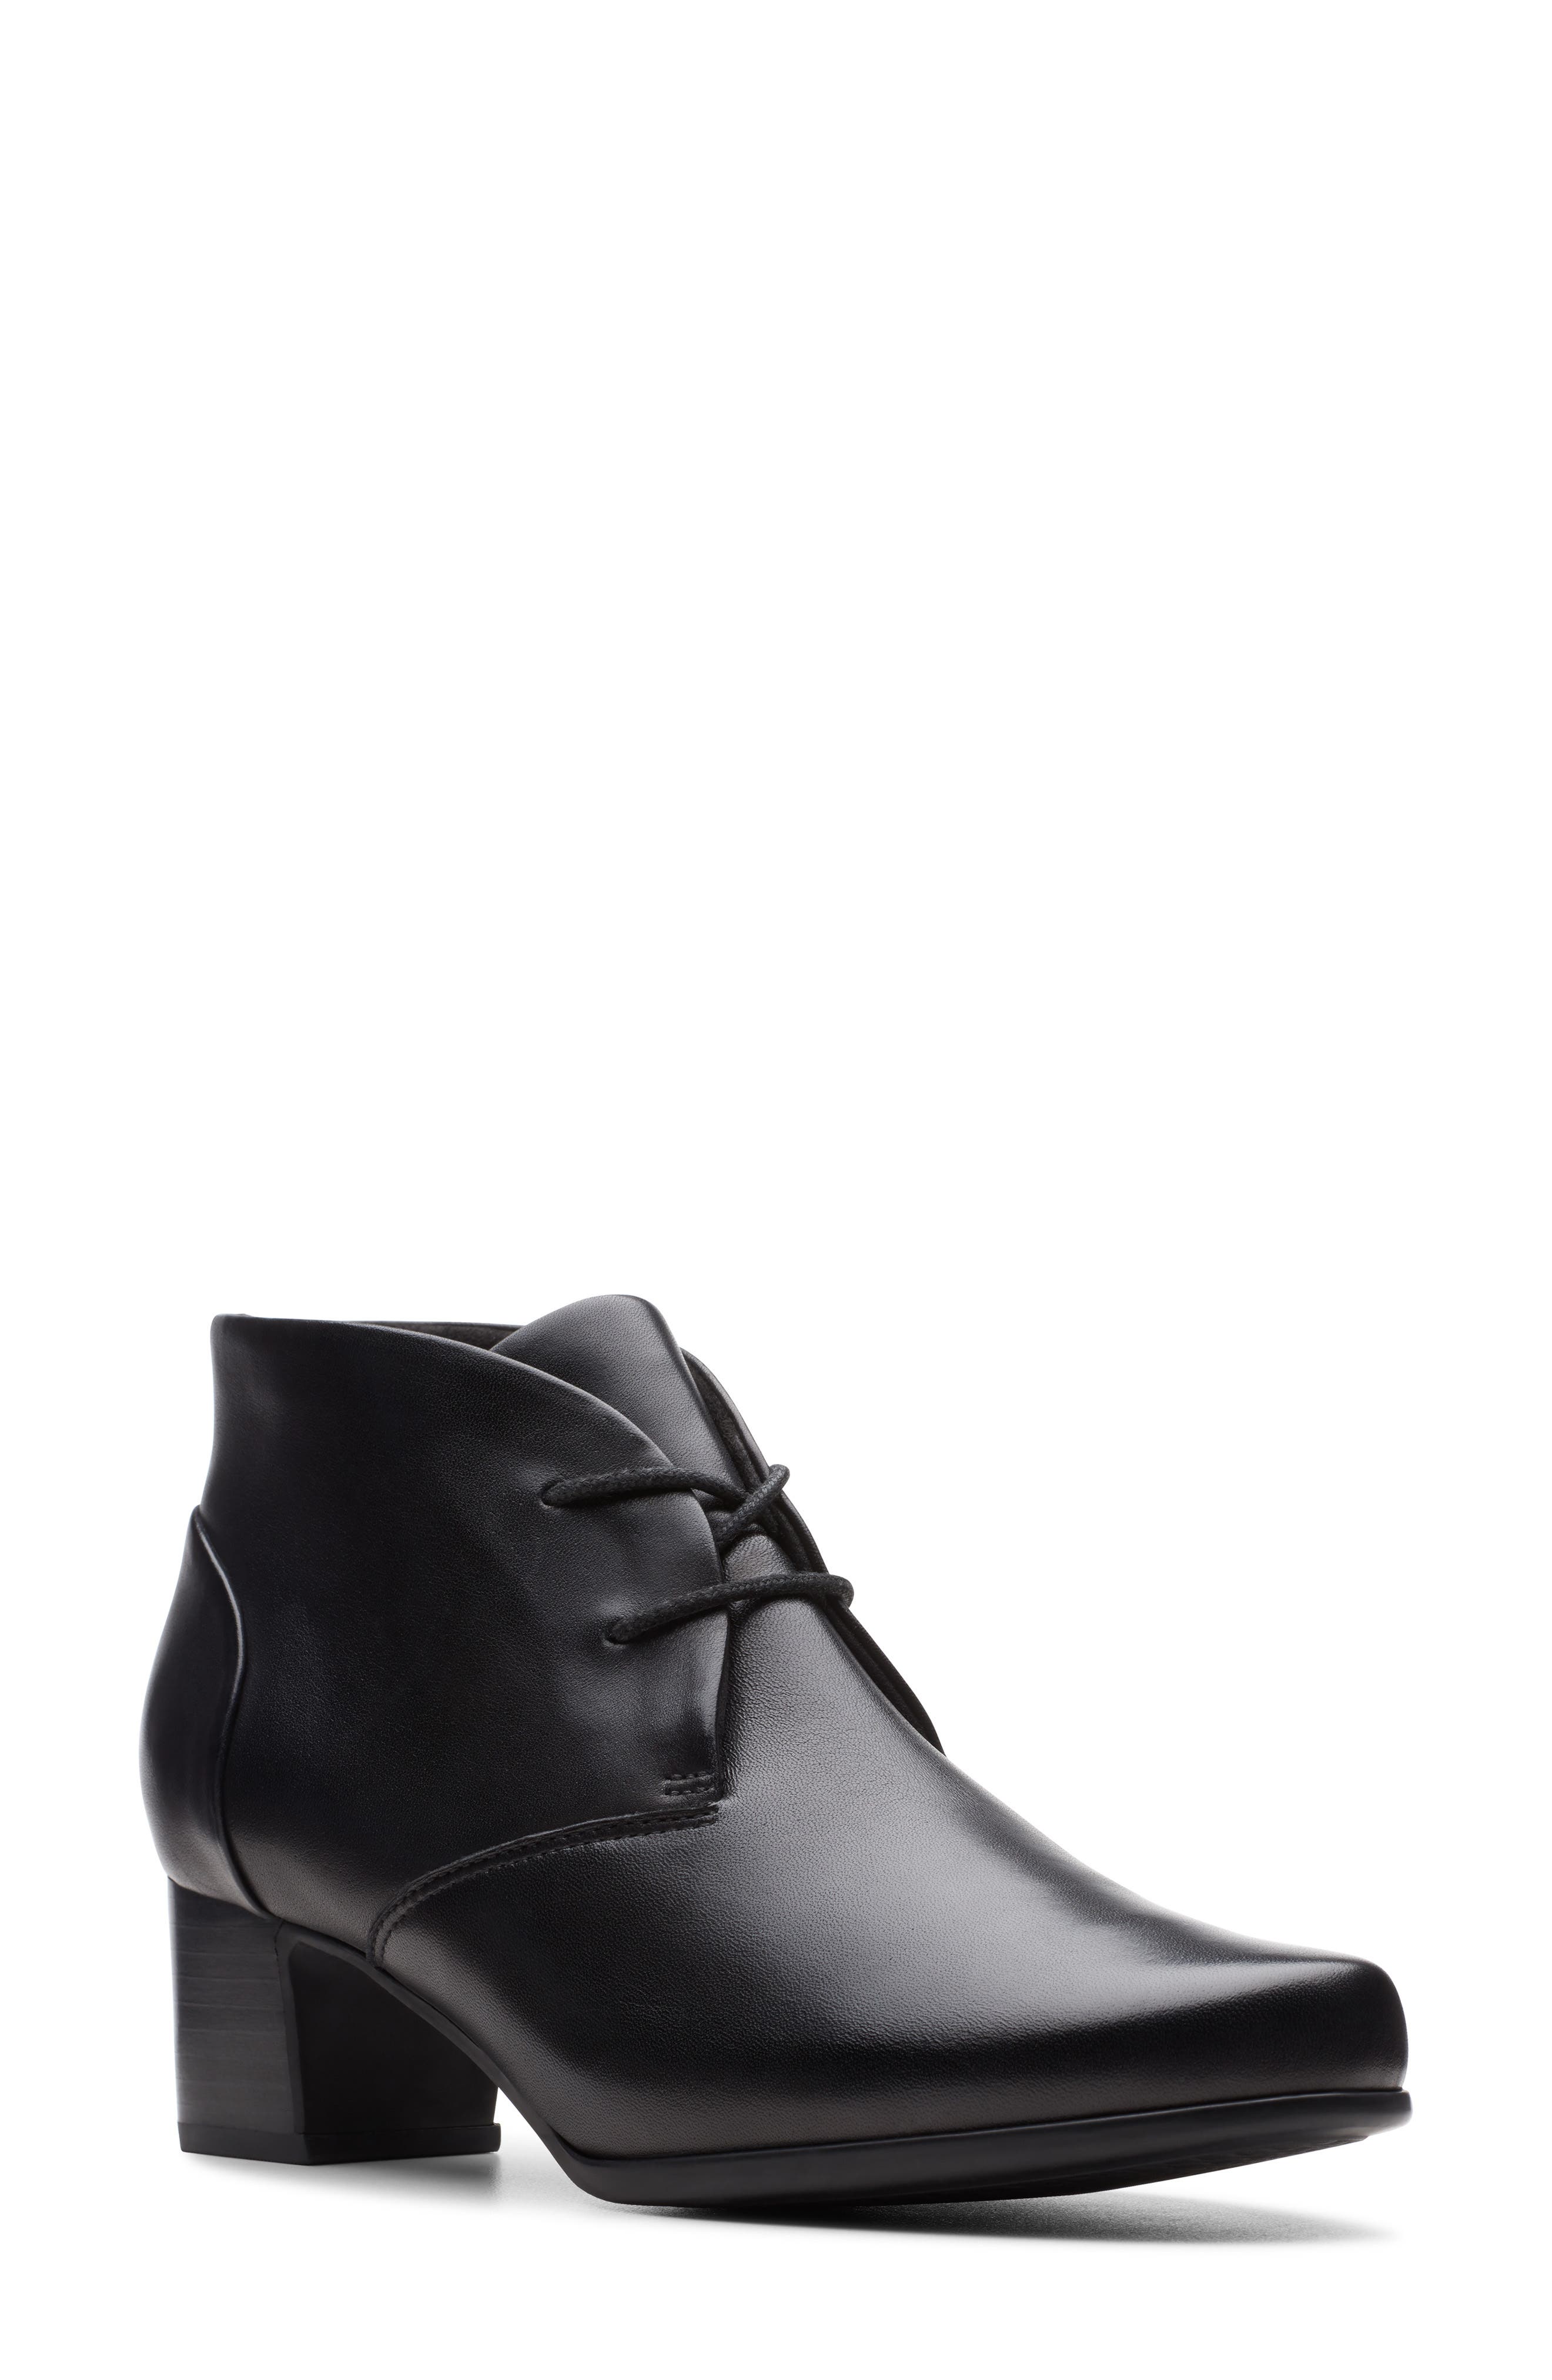 clarks black lace up ankle boots